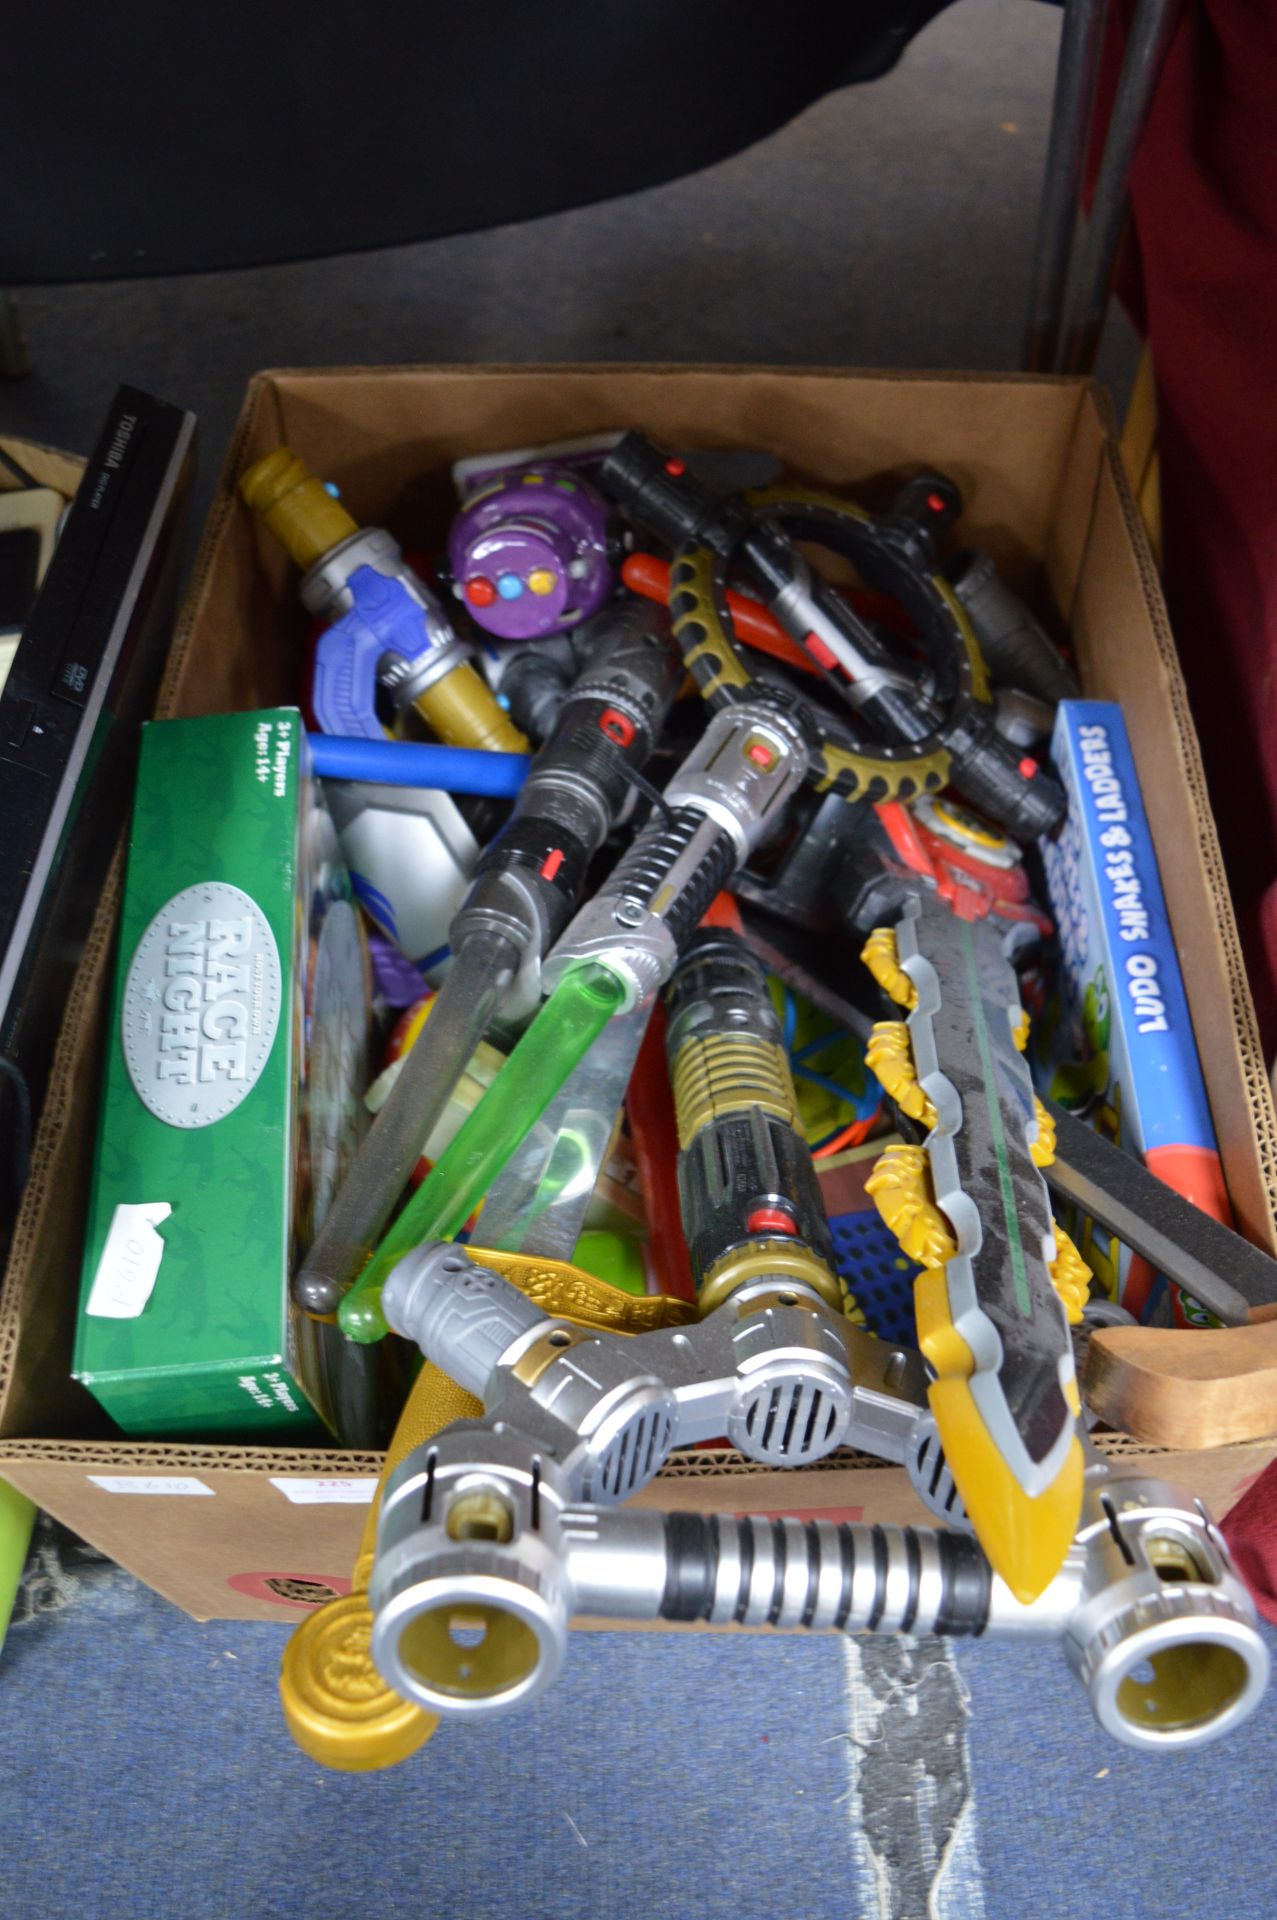 Box of Toys Including Swords, Lightsabers, etc.